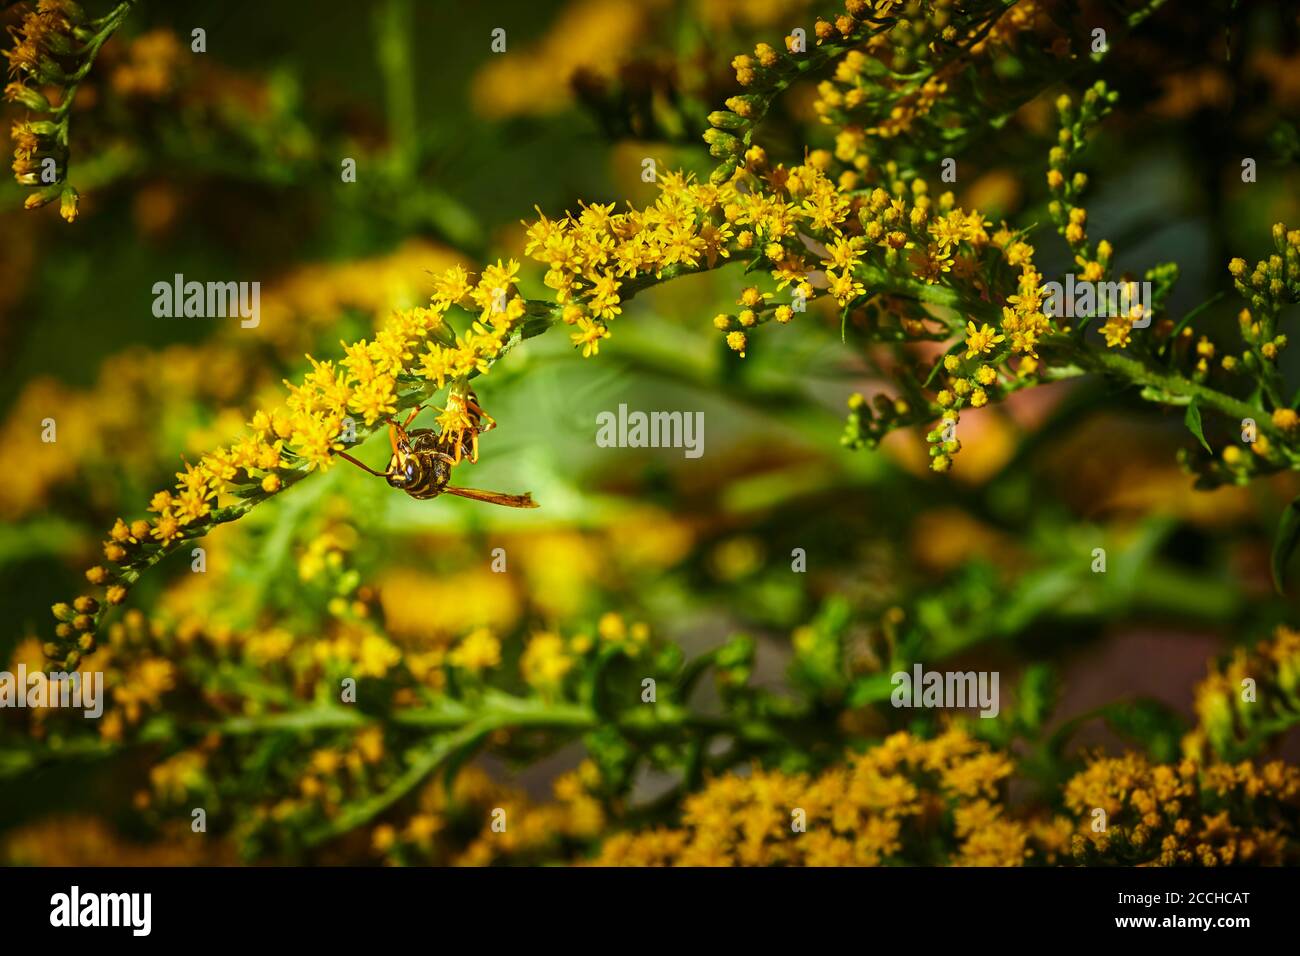 Macro shot of a wasp (Polistes dominula) sitting on a goldenrod (Solidago) in the garden. Stock Photo